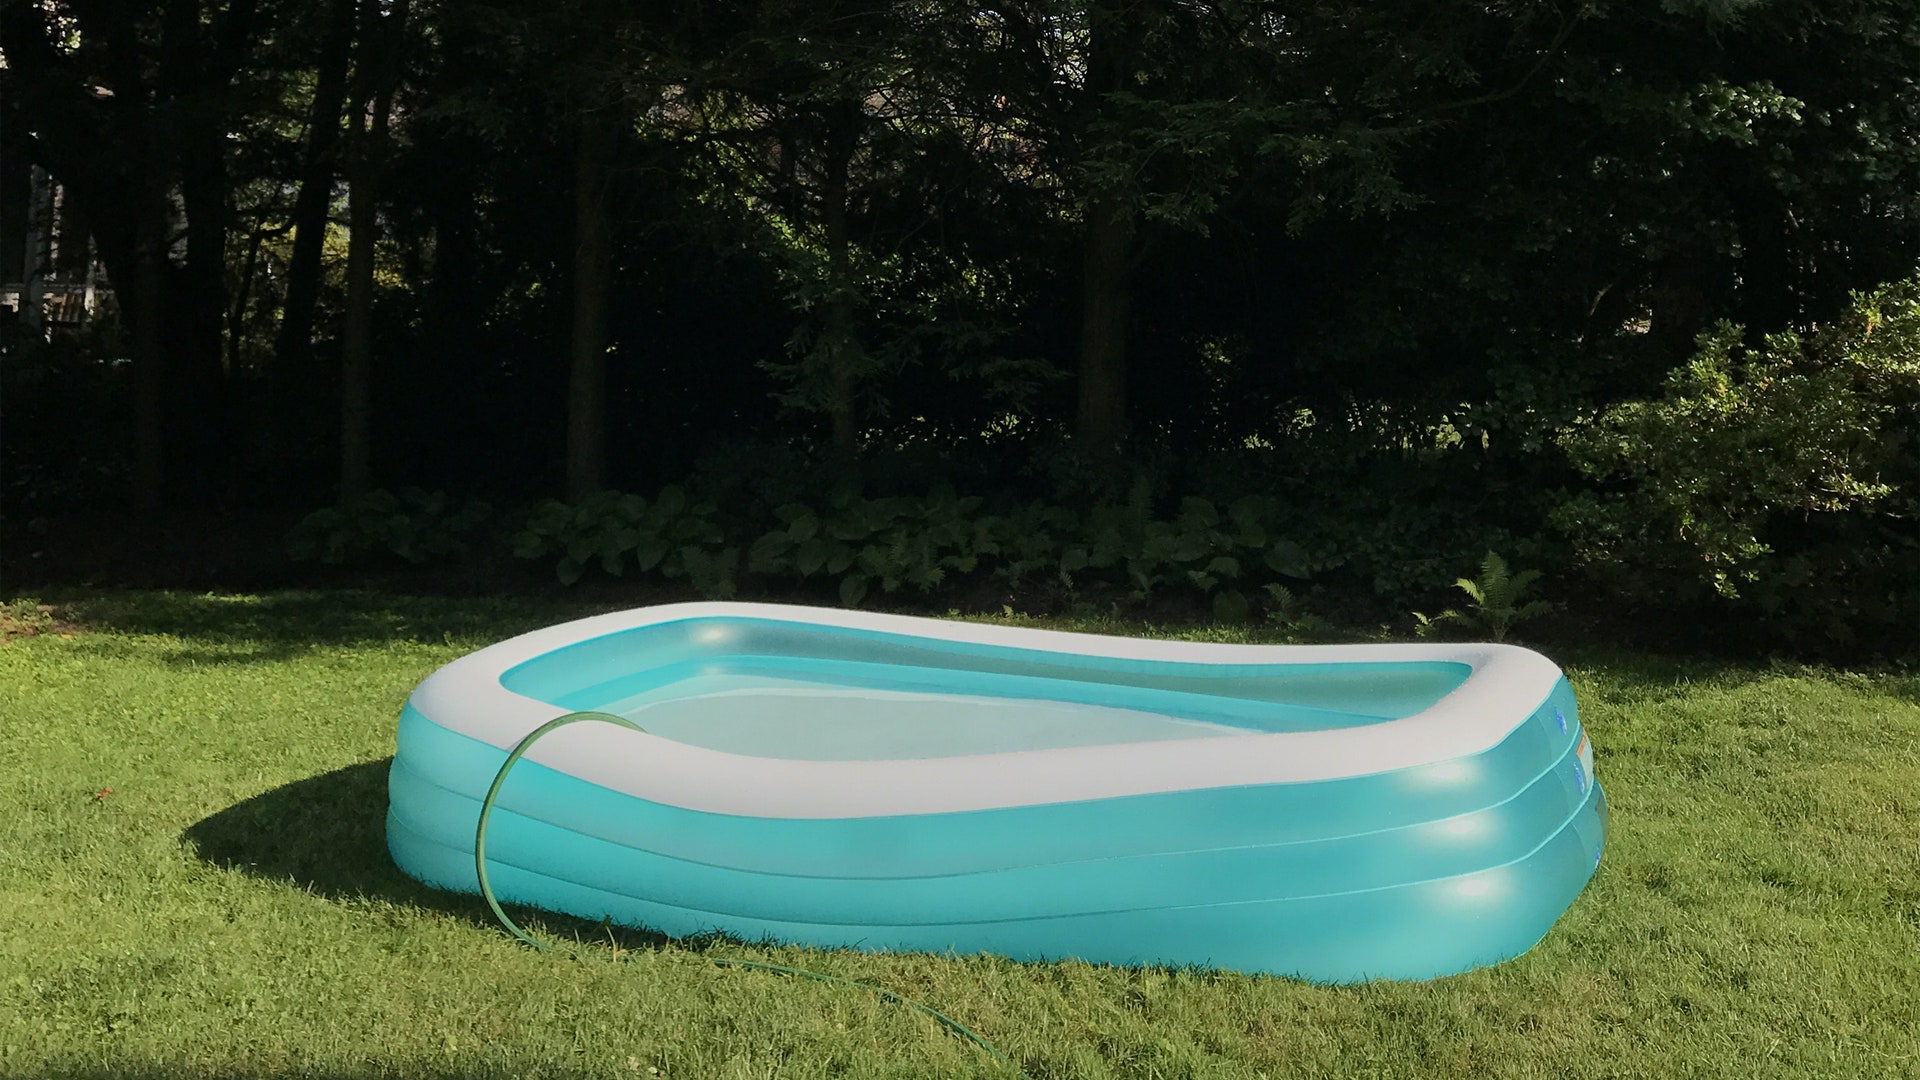 The psychology of inflatable pools: Why they bring joy and relaxation